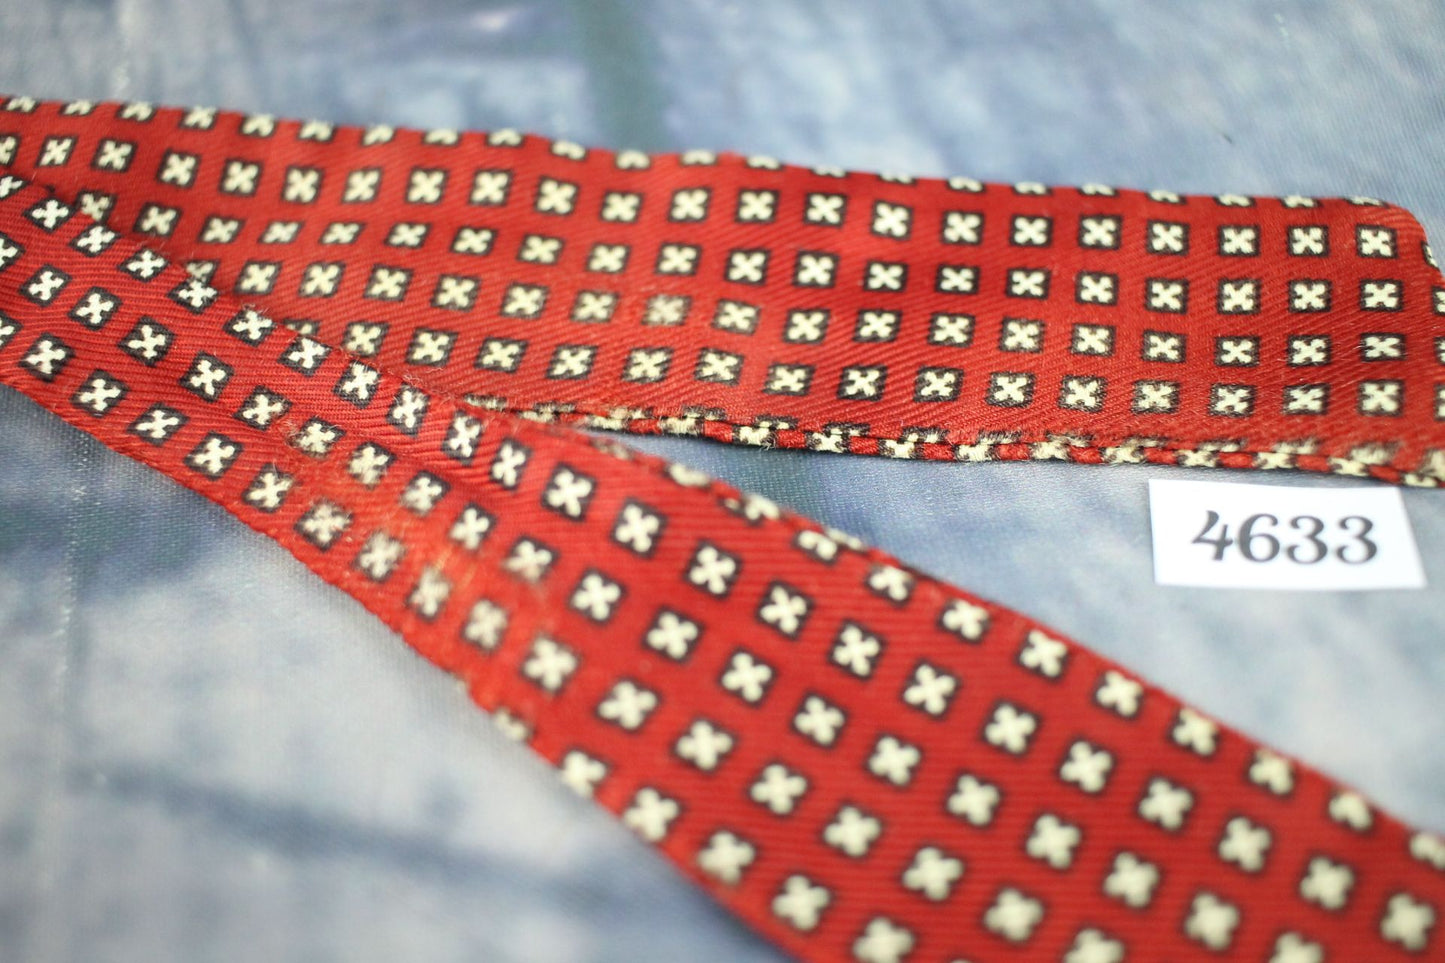 Vintage Self Tie Straight End Skinny Bow Tie Red Small White Crosses